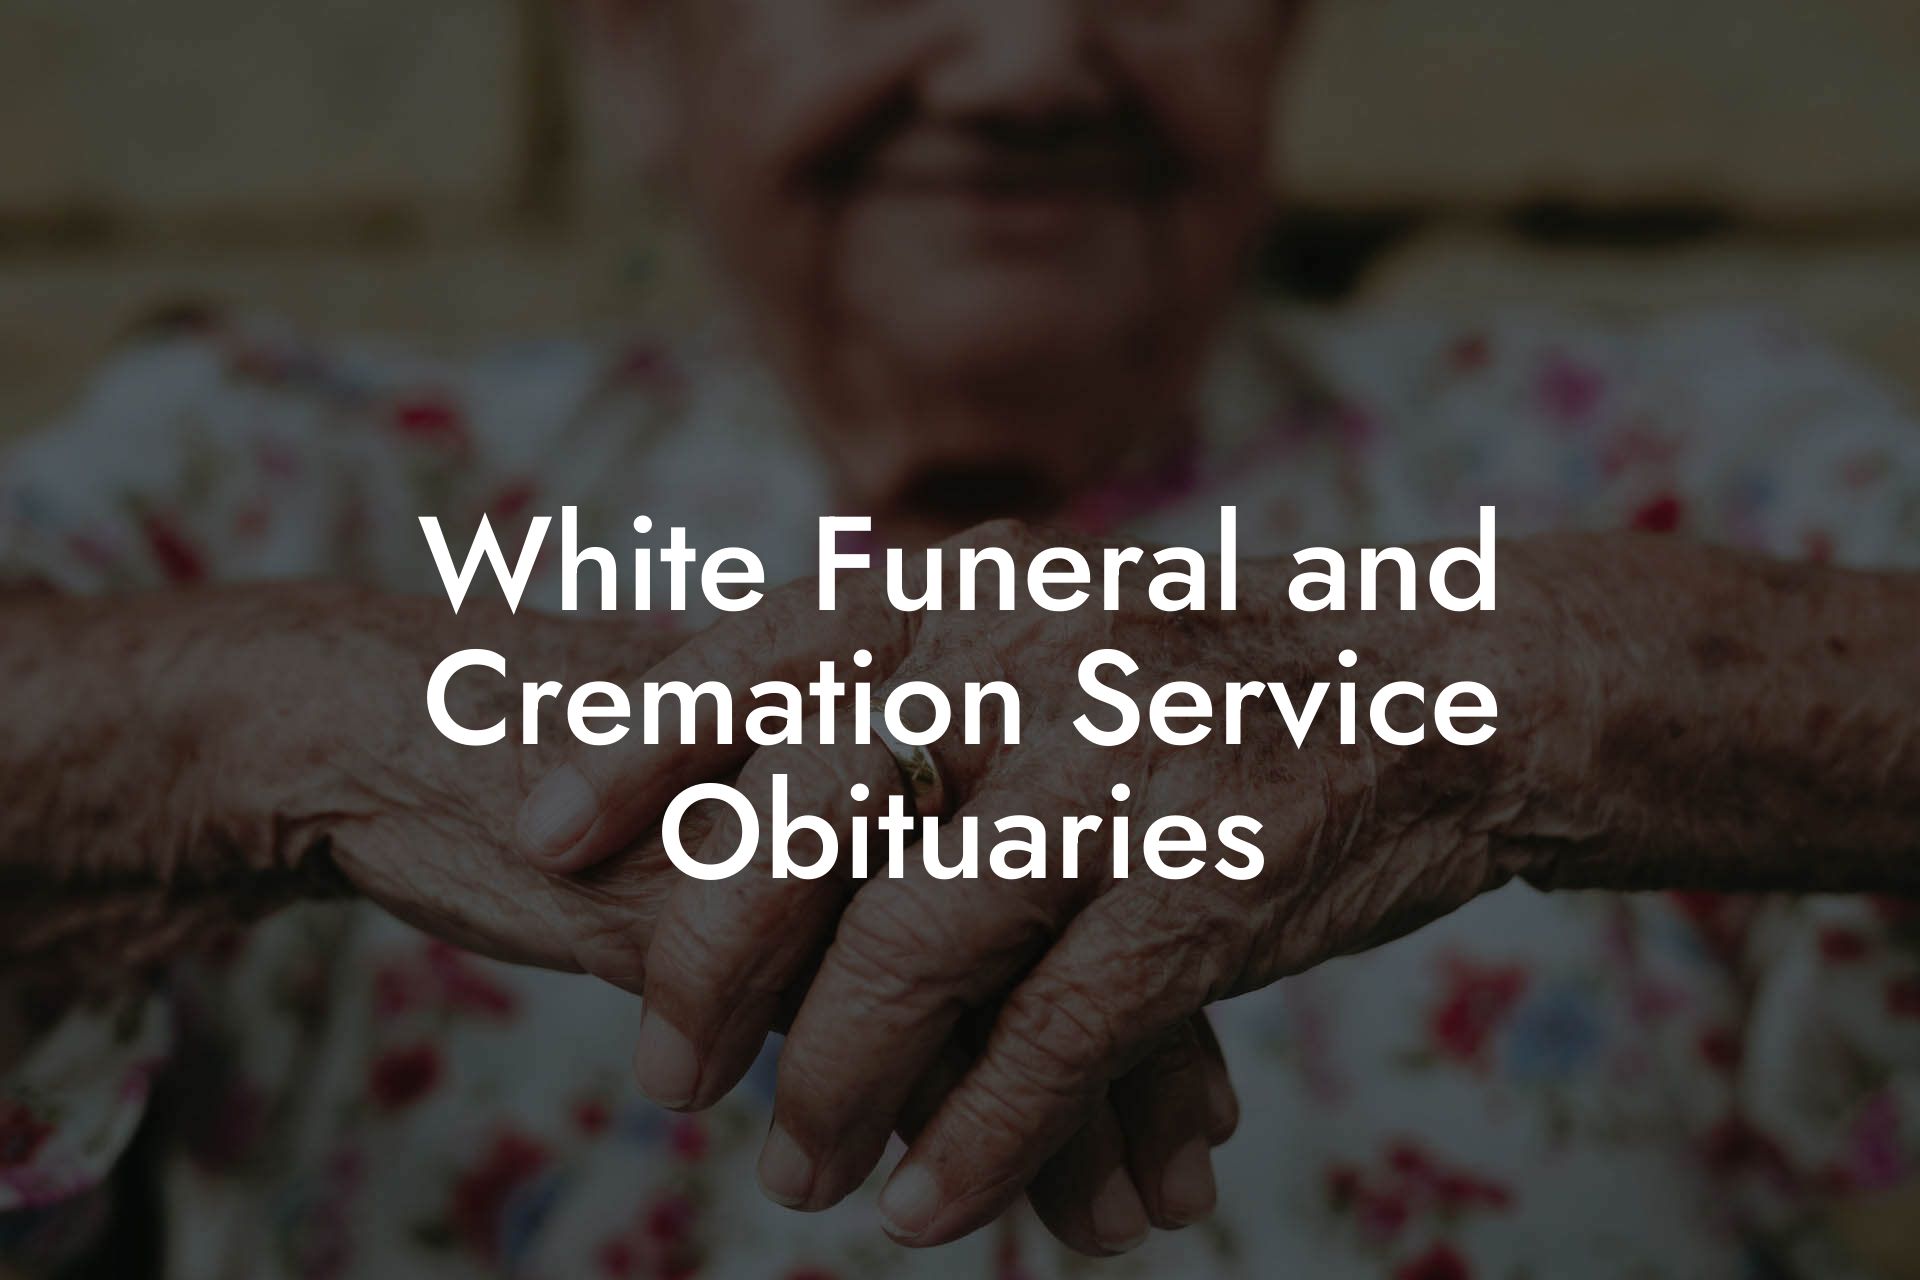 White Funeral and Cremation Service Obituaries